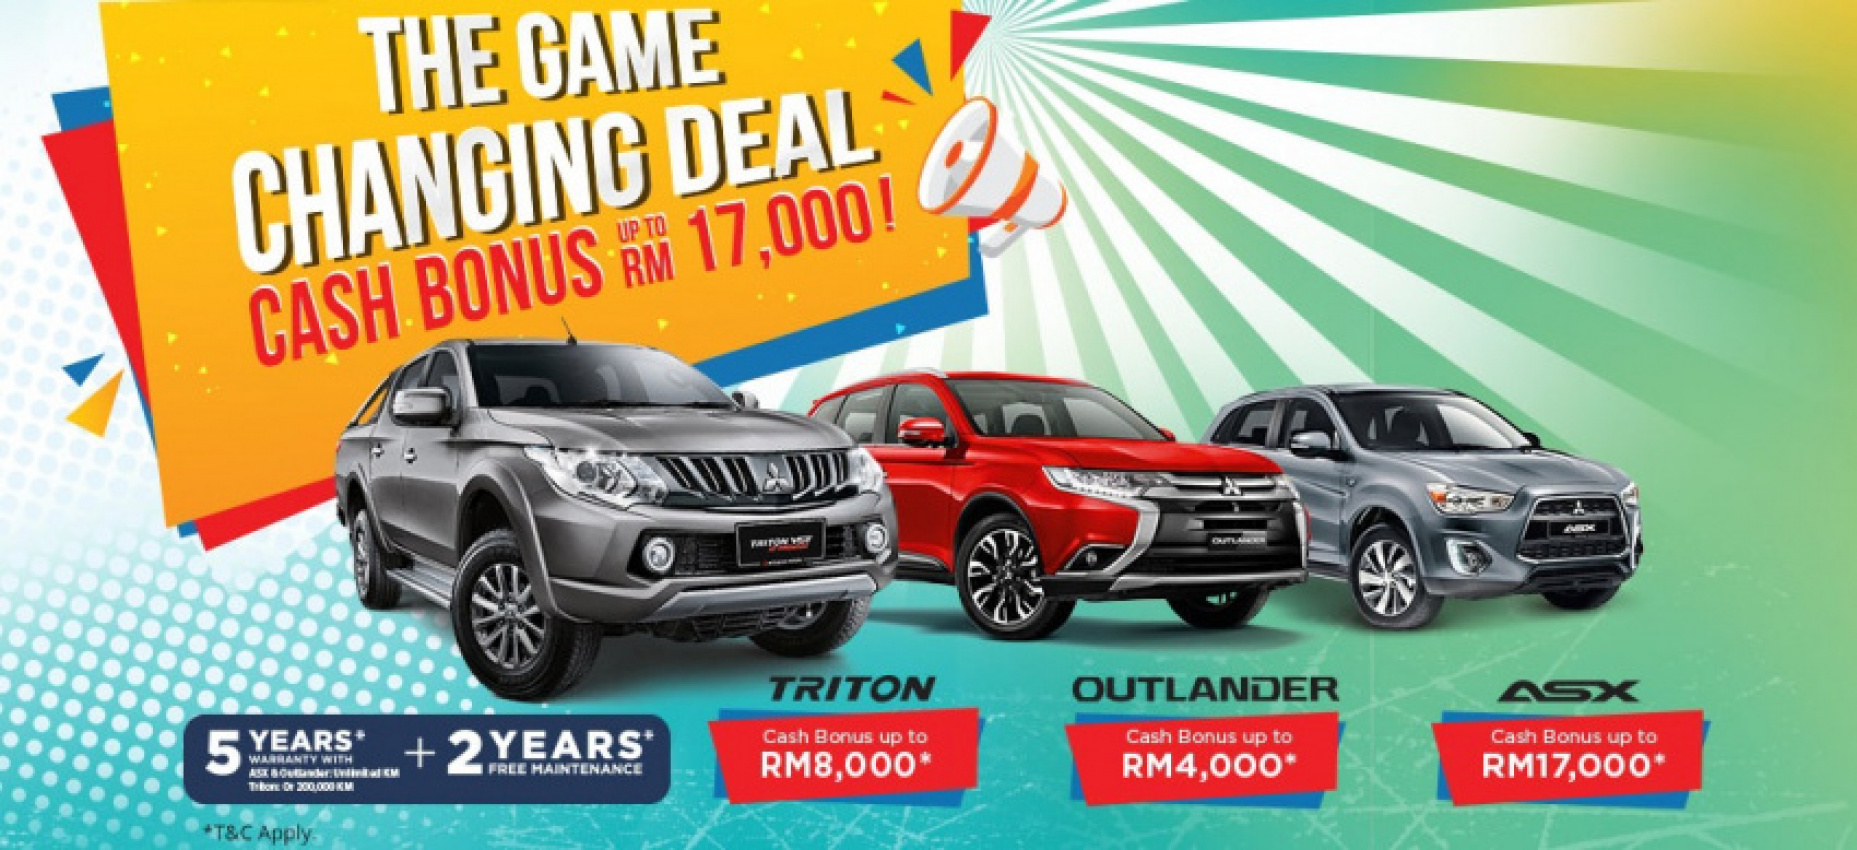 autos, car brands, cars, mitsubishi, mitsubishi motors malaysia ‘game changing deal’ offers up to rm17k bonus on selected models